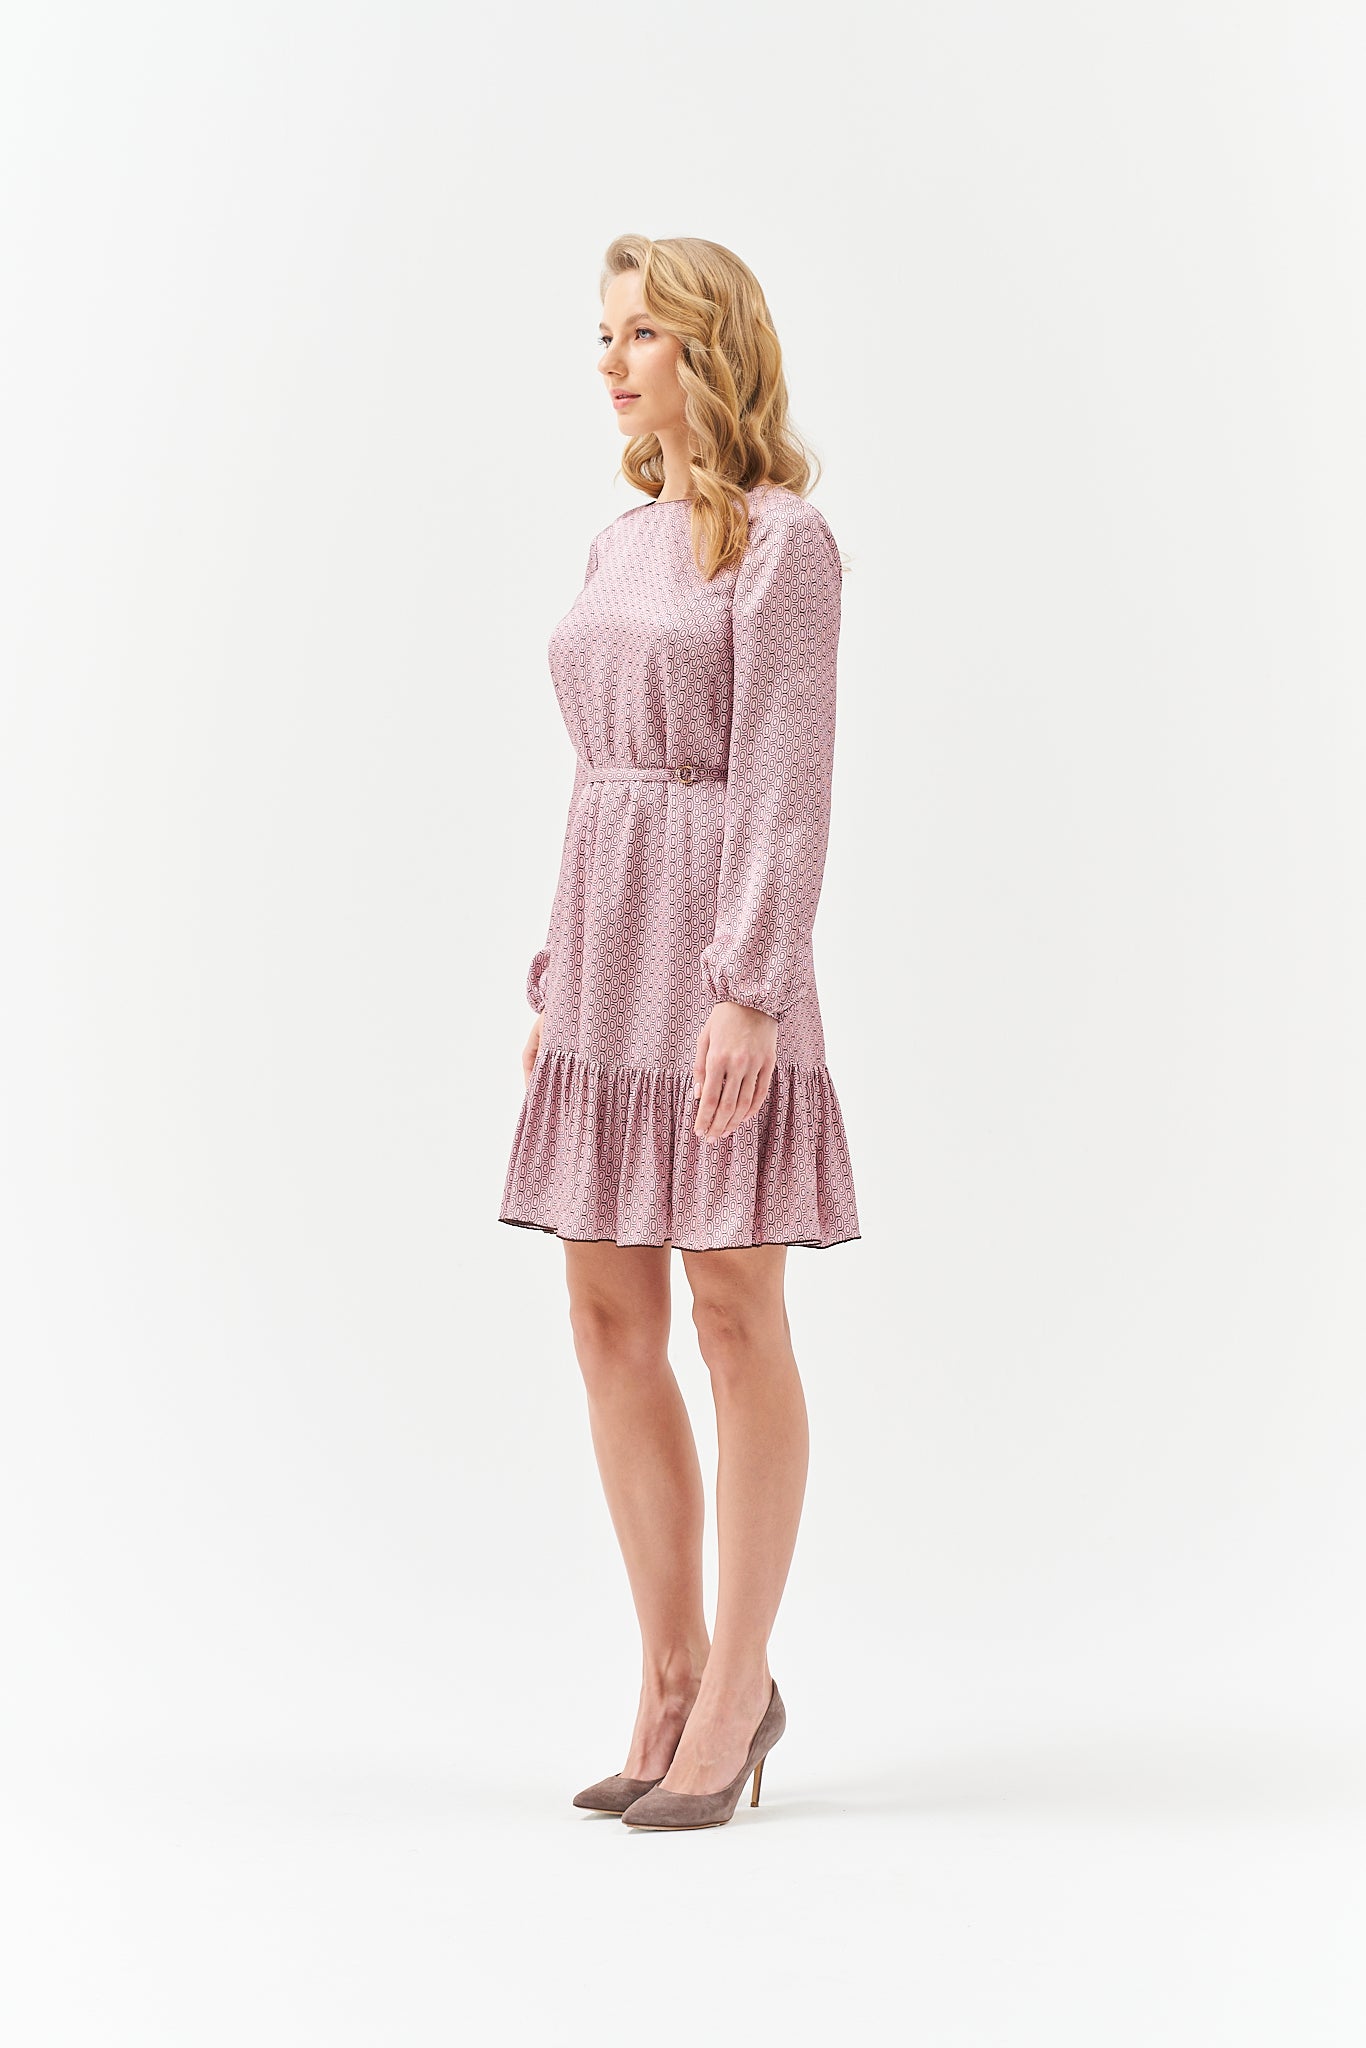 LONG SLEEVE BELTED DRESS IN ROSE PINK